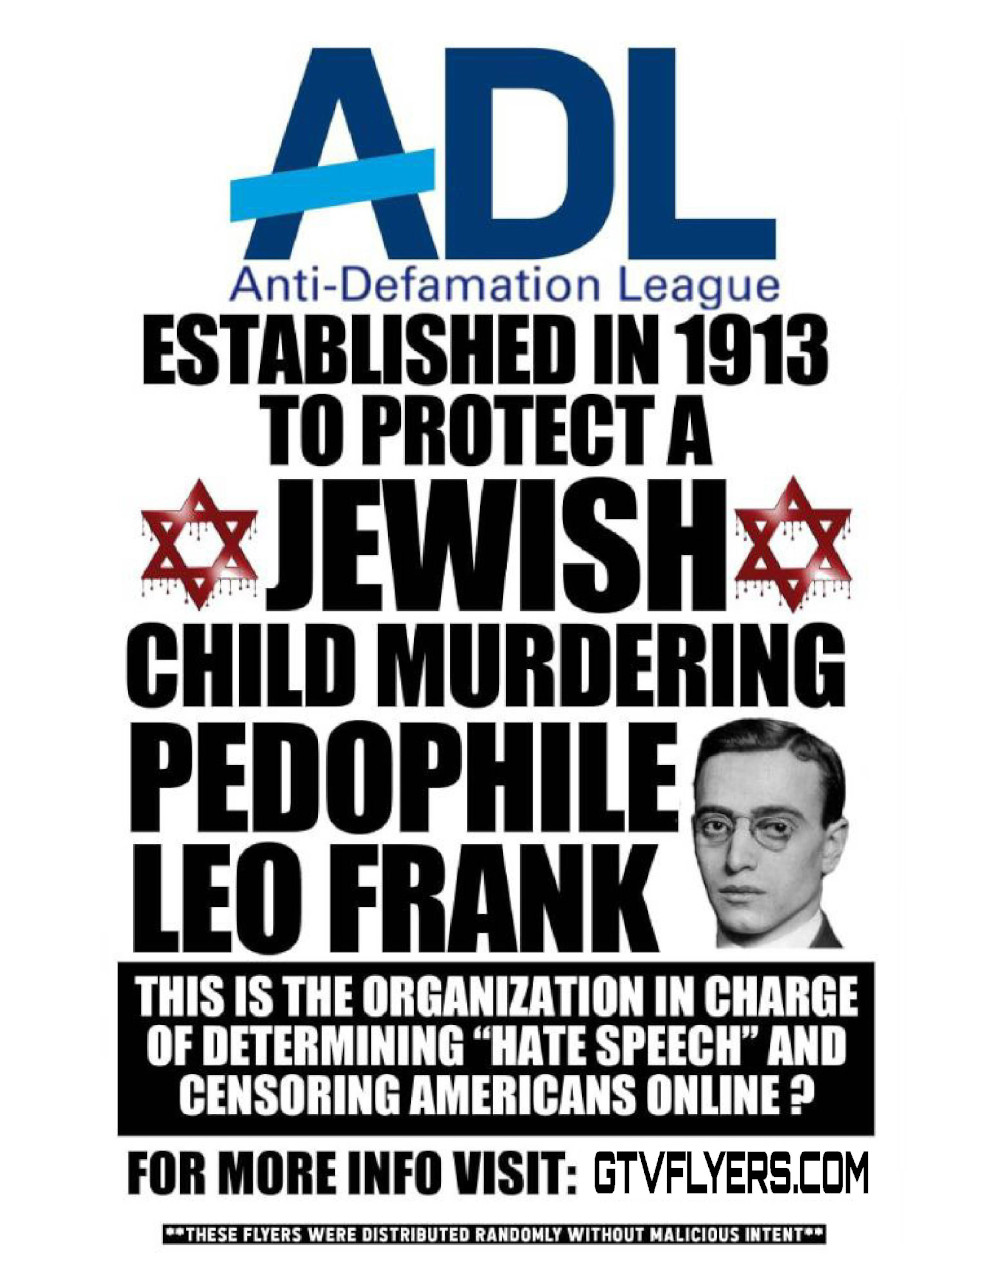 ADL-Established-in-1913-to-Protect-a-Jewish-Pedophile-1.jpg